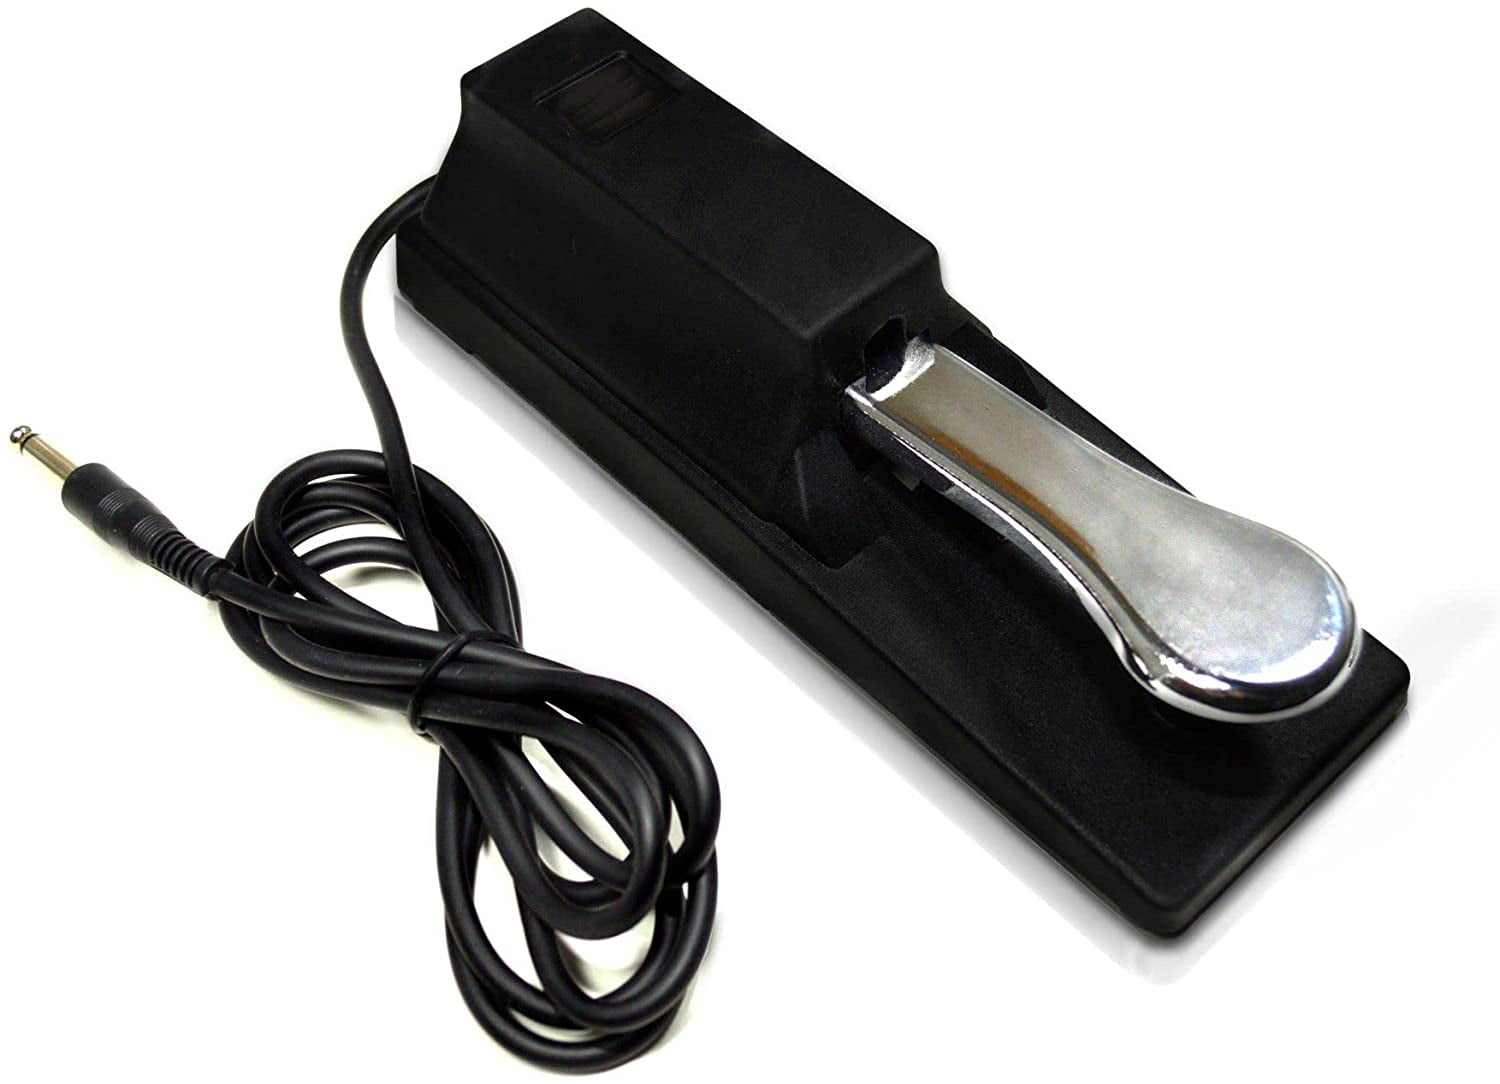 HQRP AC Adapter & Sustain Pedal for Yamaha PSR-E203 YPT-200 YPT-210 YPT-220 PSR-E313 DGX-200 DGX-300 DGX-500 PSR-195 PSR-225 PSR-240 PSR-248 PSR-E213 PSR-E223 PSR-E323 PSR-260 PSR-273 Keyboards 